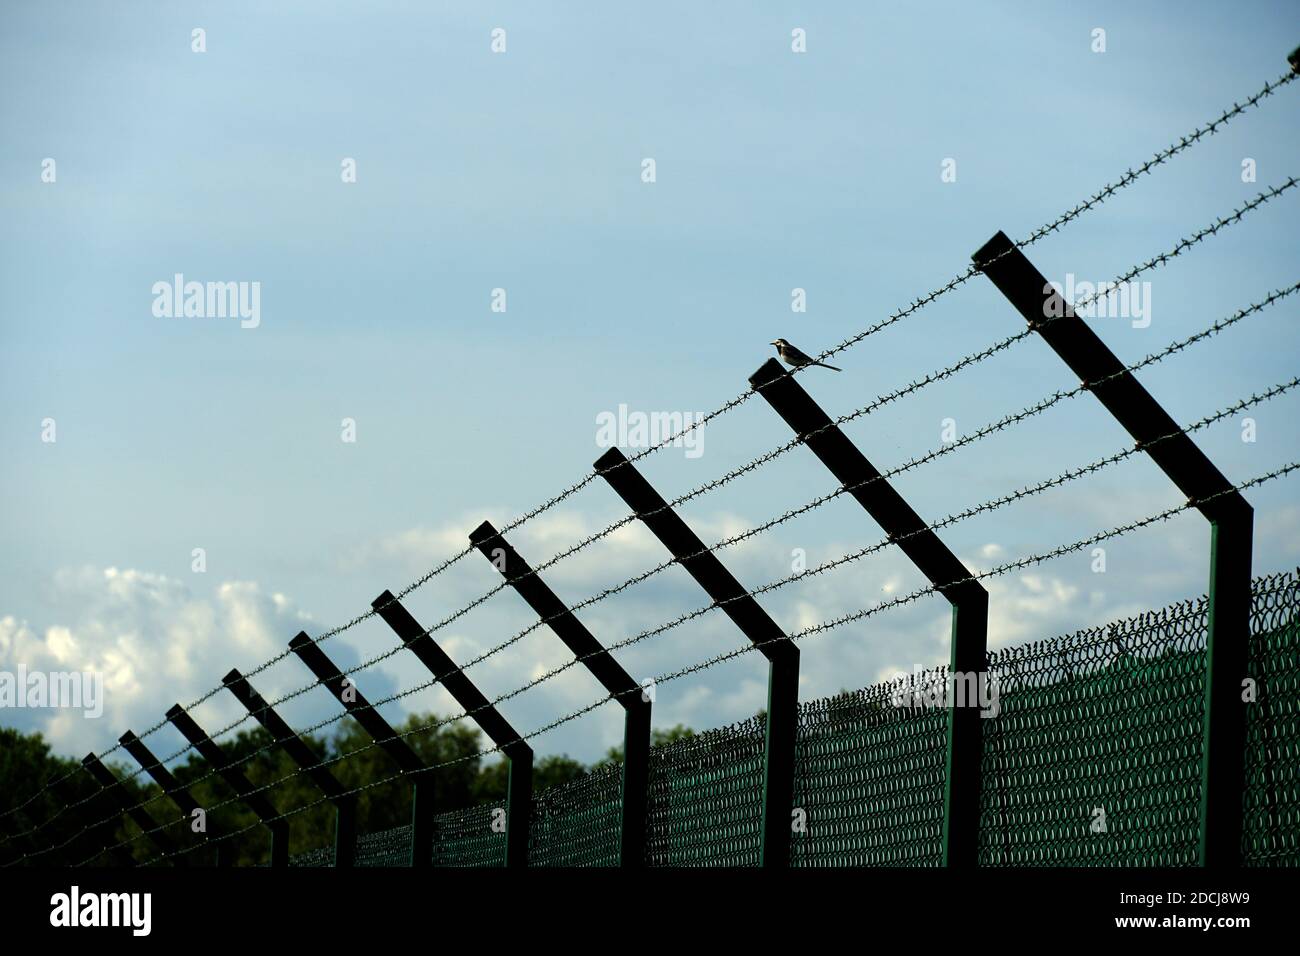 A fence with barbed wire with a bird sitting on it and clear blue sky on the background on the airport Zurich in Switzerland. It can have symbolic mea Stock Photo